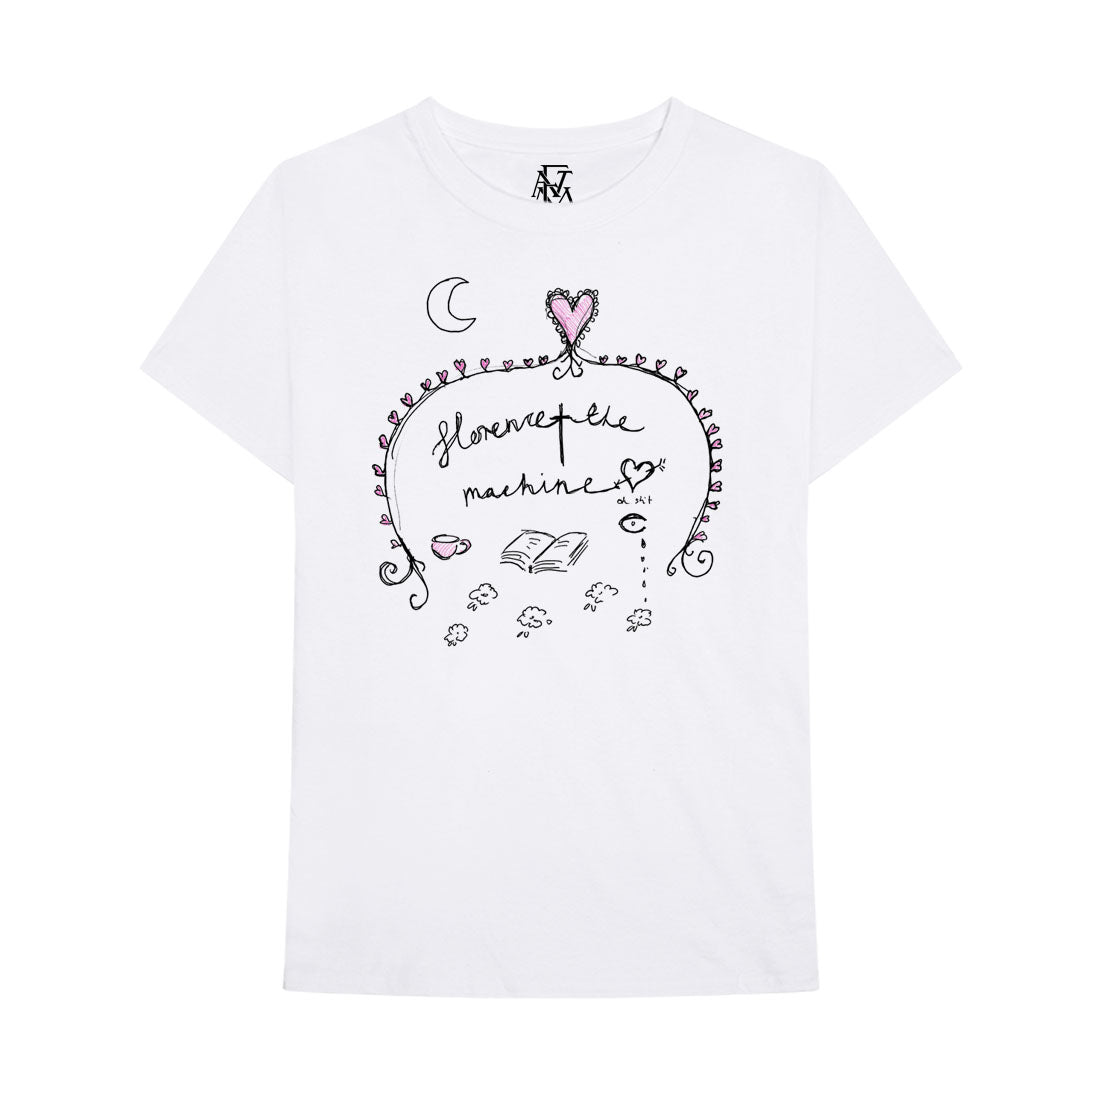 Florence + The Machine - White Doodle tee